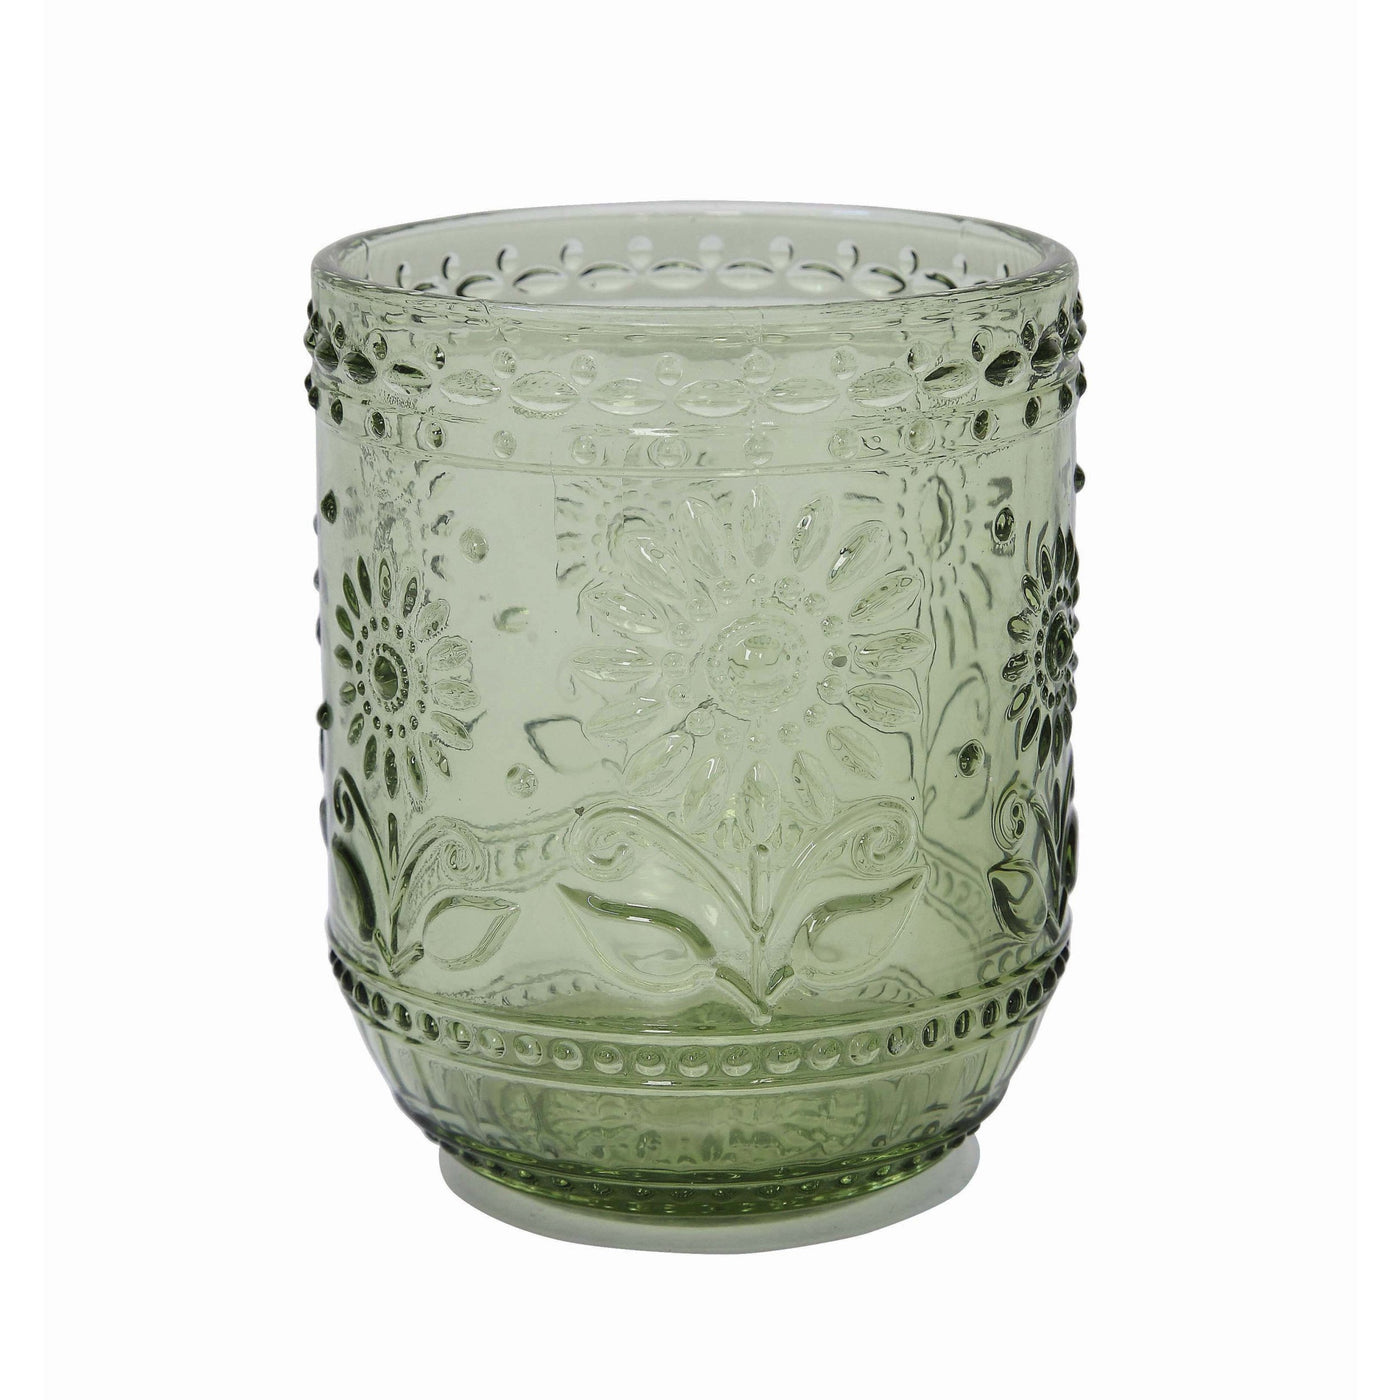 12 oz. Embossed Drinking Glass, Green